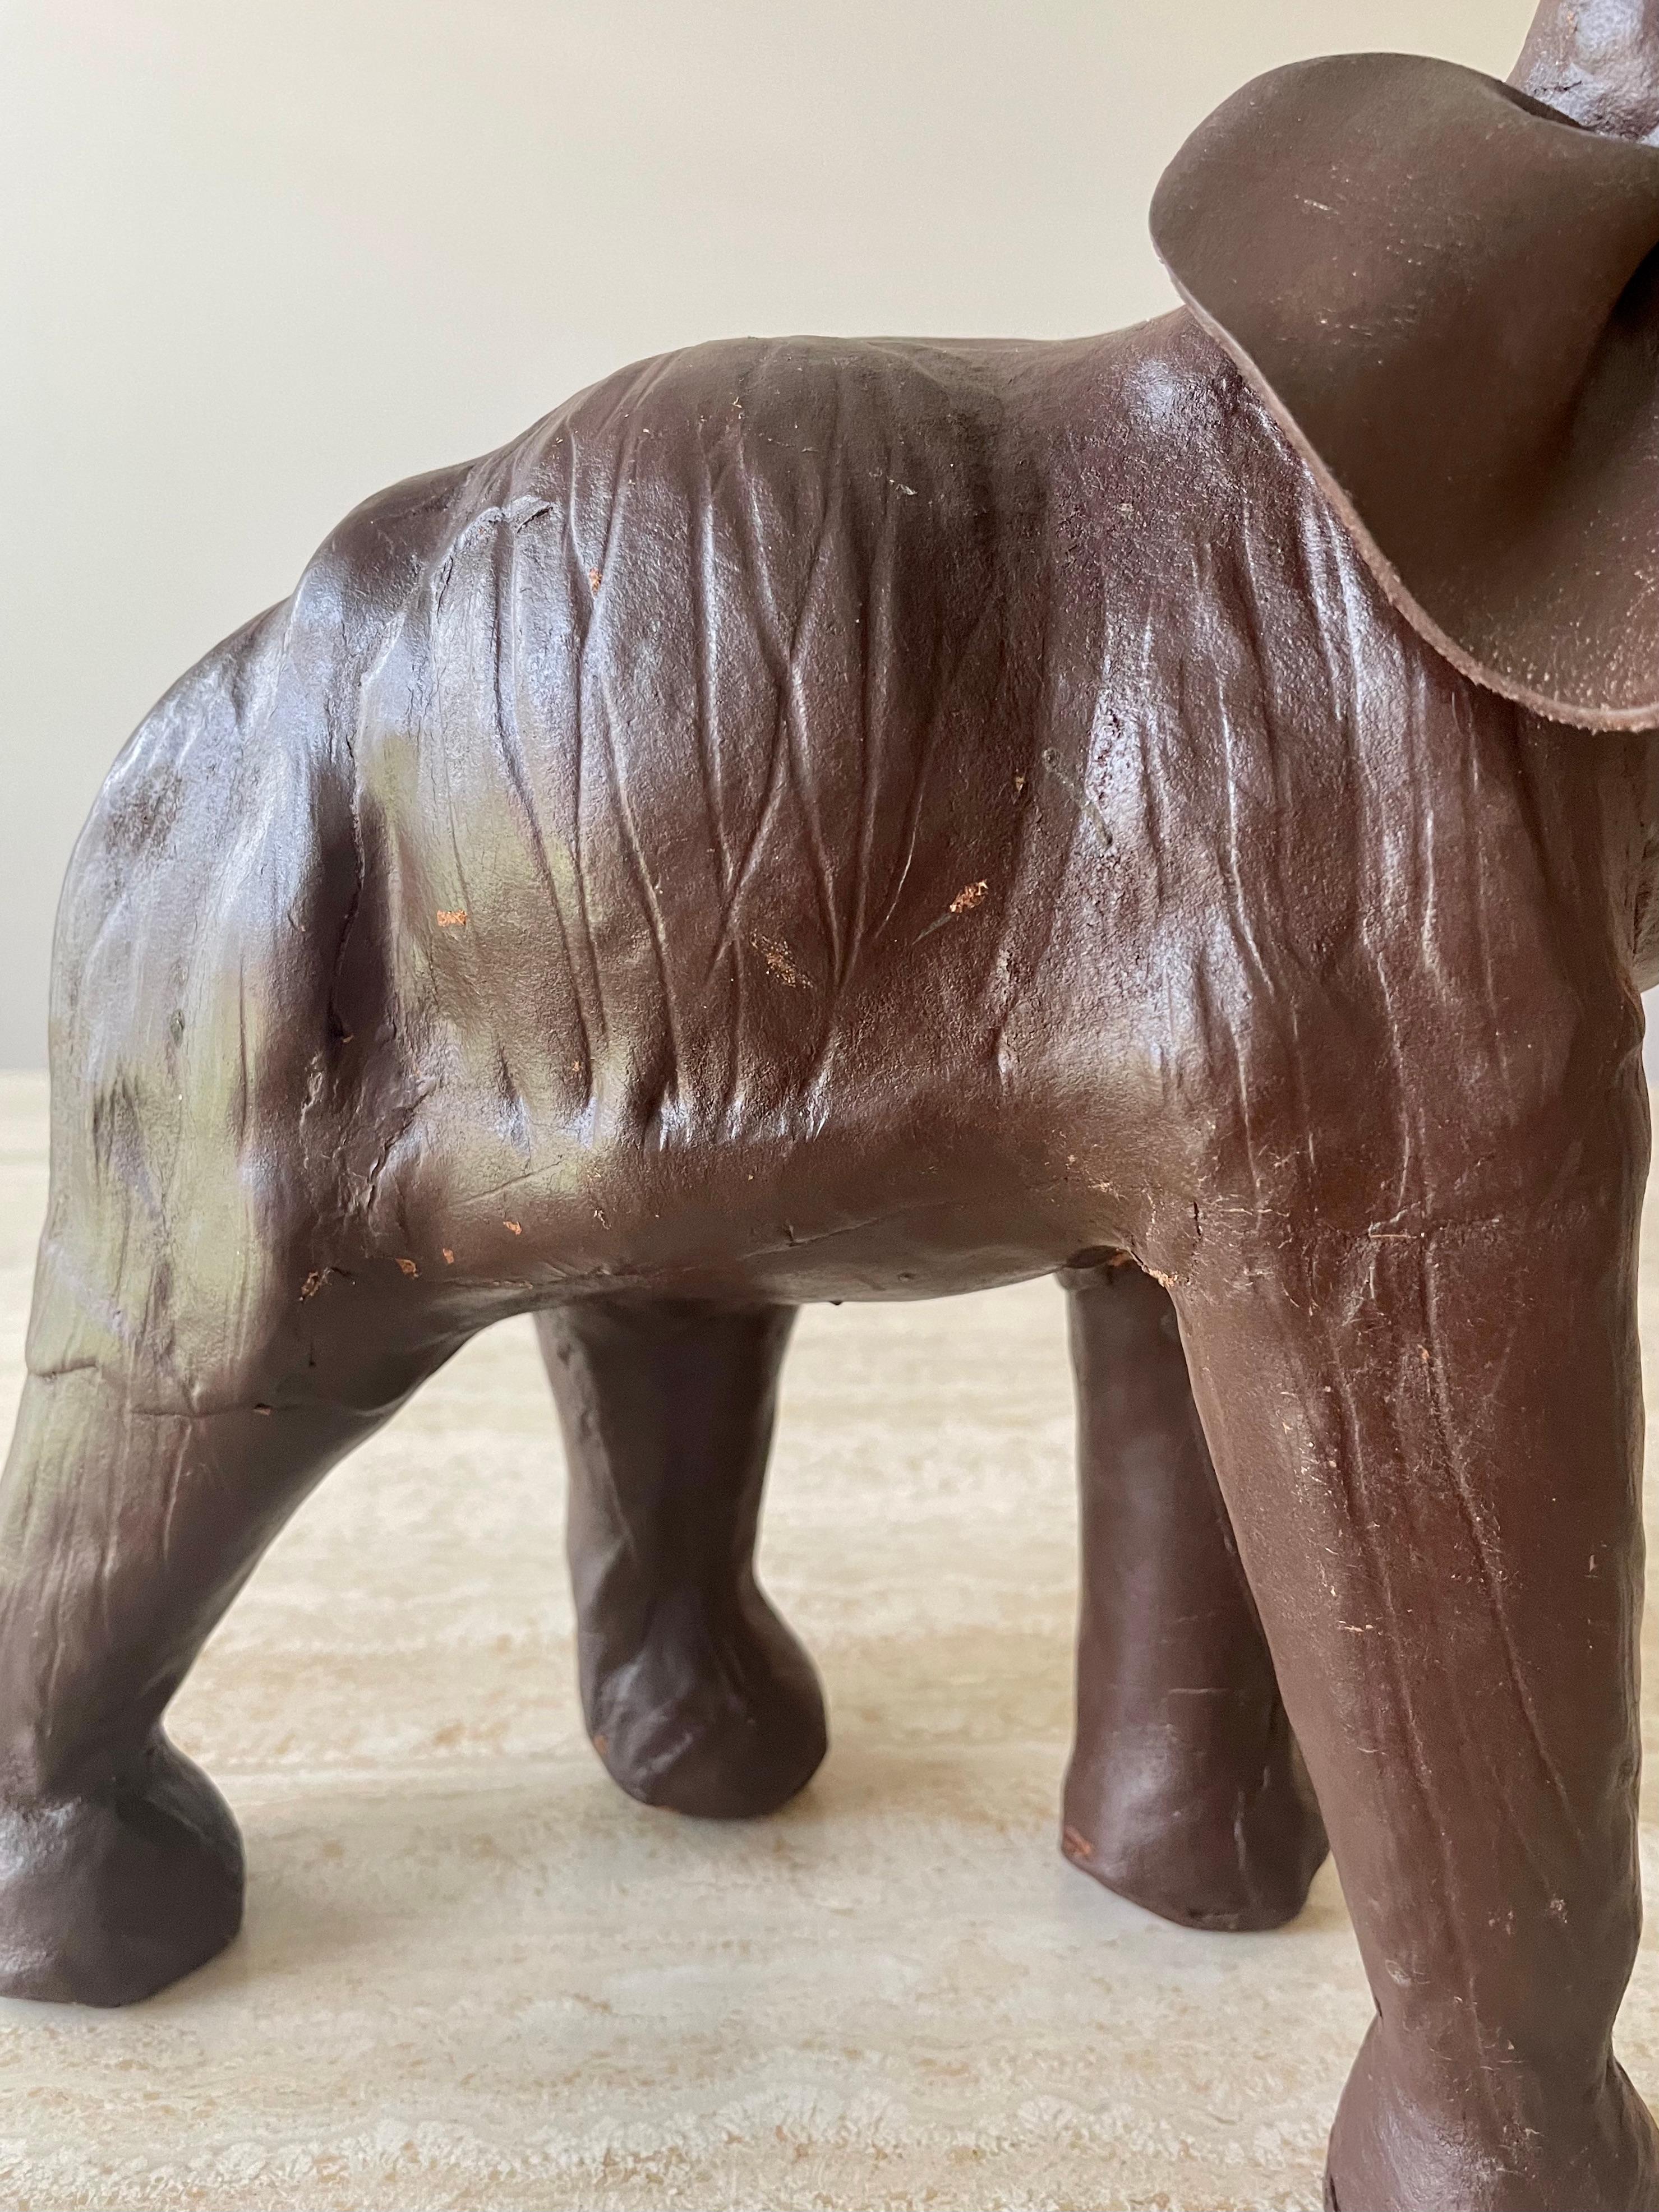 Modern Leather Elephant Sculpture For Sale